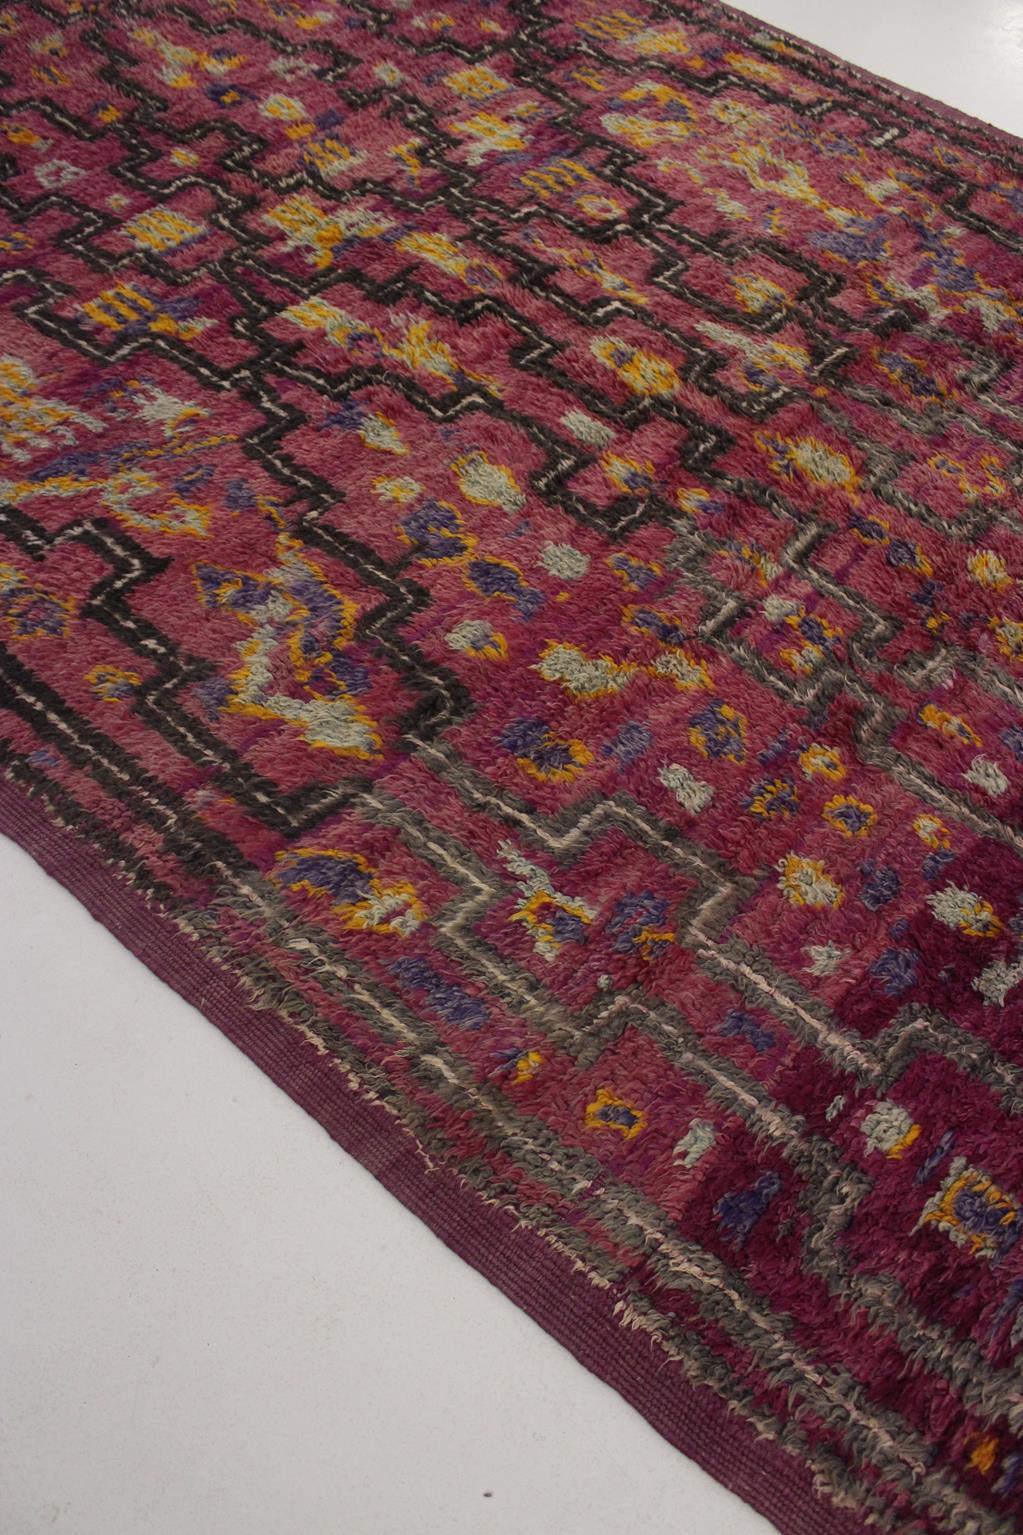 Vintage Moroccan Talsint rug - Wine purple - 6.2x12feet / 190x365cm In Good Condition For Sale In Marrakech, MA